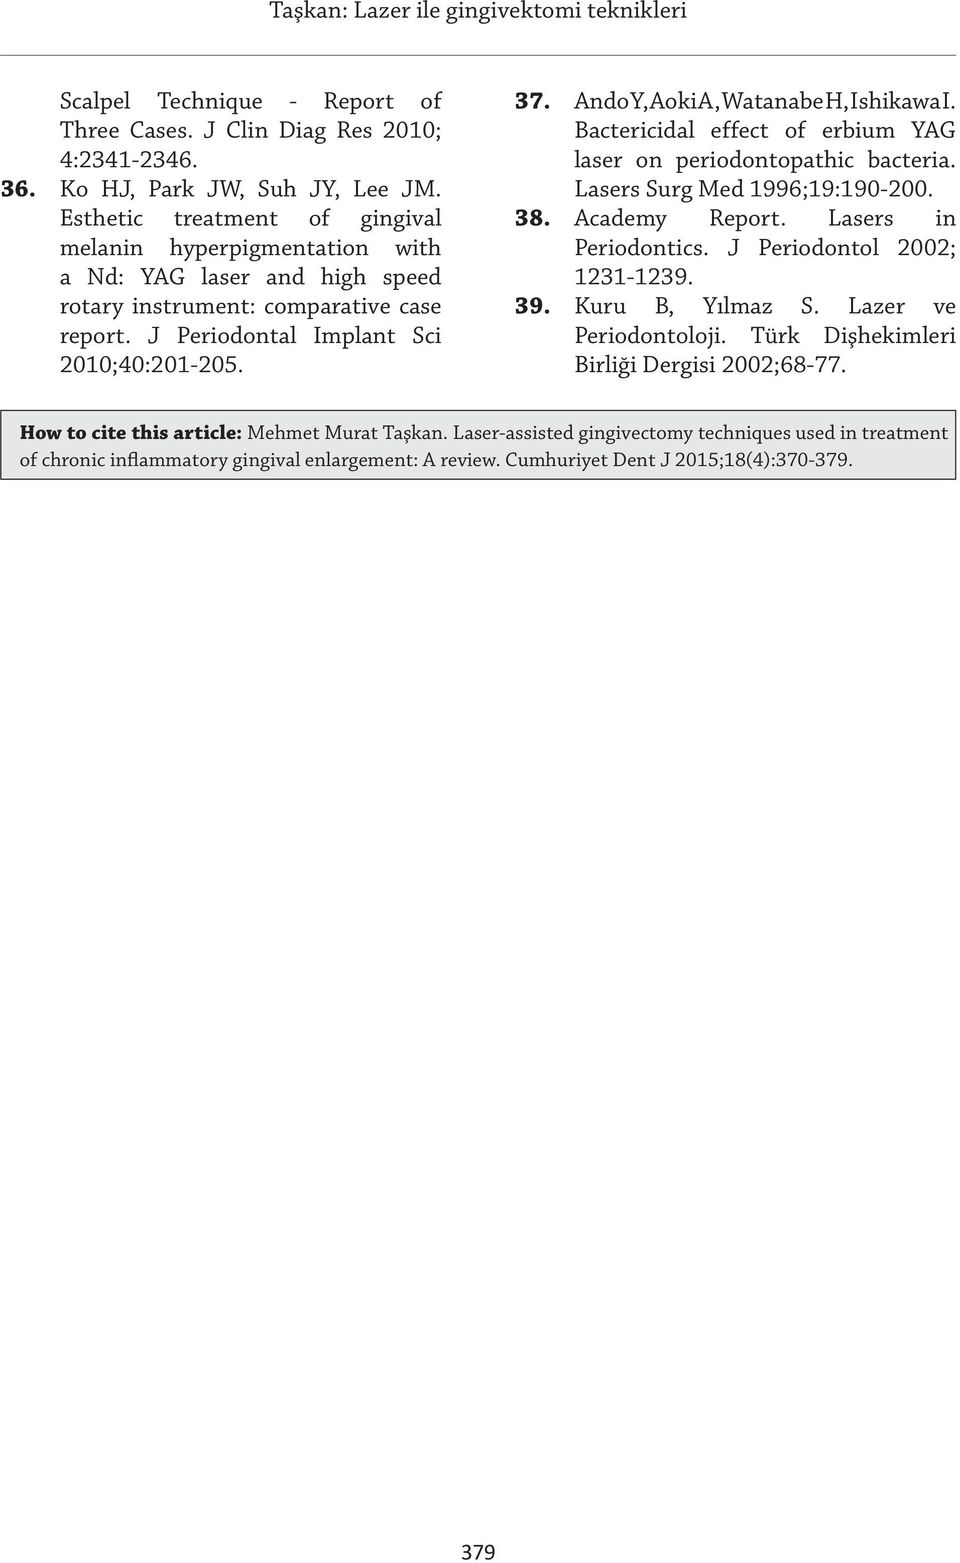 Ando Y, Aoki A, Watanabe H, Ishikawa I. Bactericidal effect of erbium YAG laser on periodontopathic bacteria. Lasers Surg Med 1996;19:190-200. 38. Academy Report. Lasers in Periodontics.